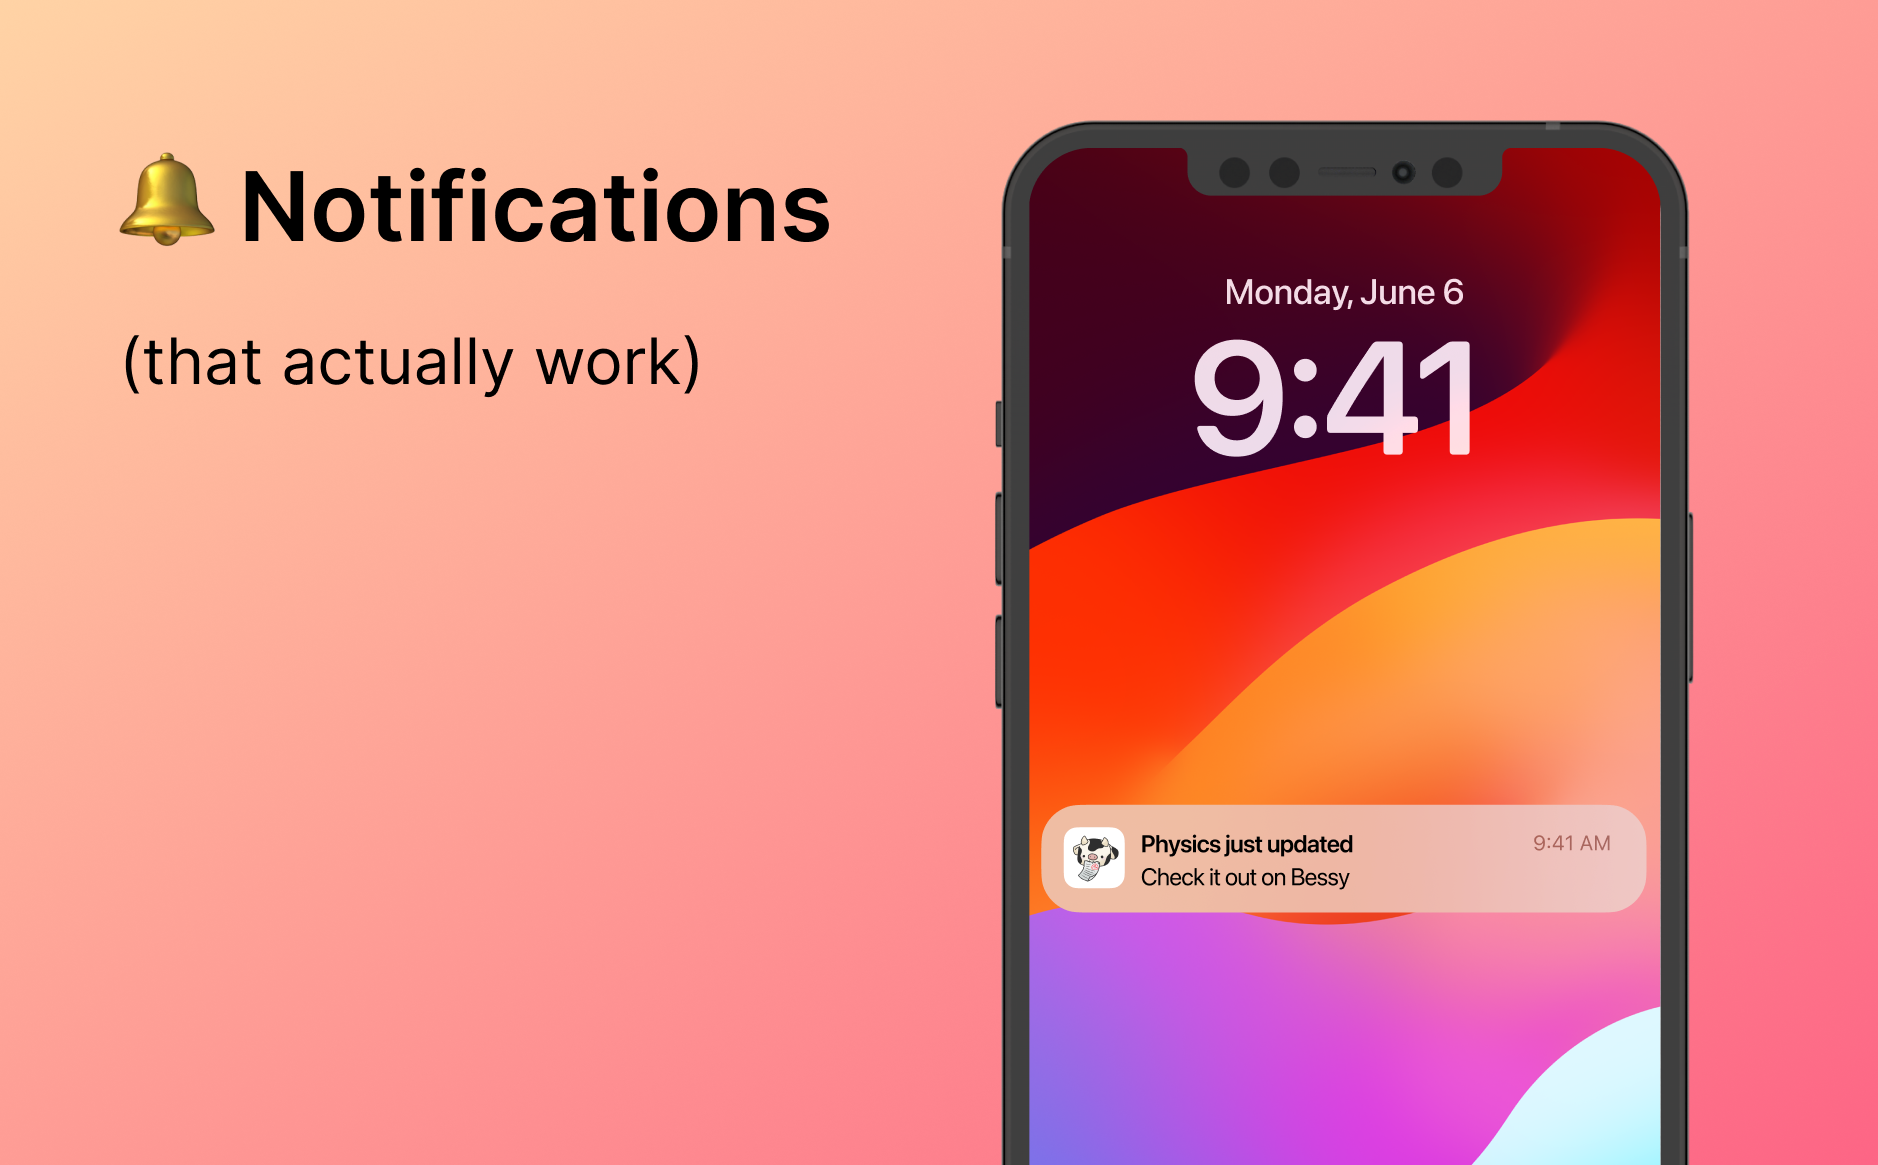 An image showing an iPhone with an example of a notification